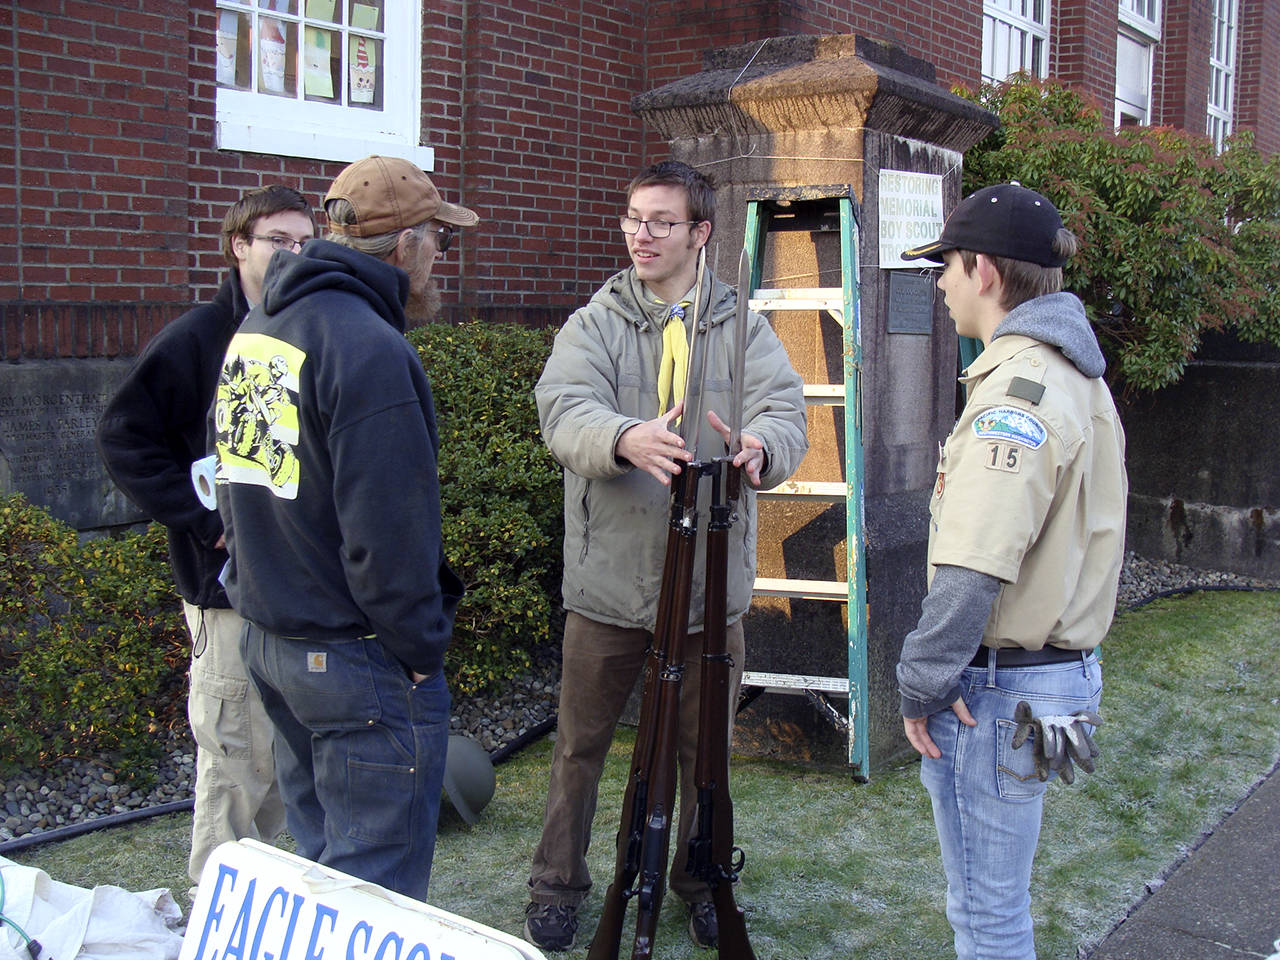 (Photo courtesy Malchert family) Joseph Malchert, center, talks with volunteers (including his twin, Daniel, far left) about mounting the rifle display at the World War I memorial in Montesano.